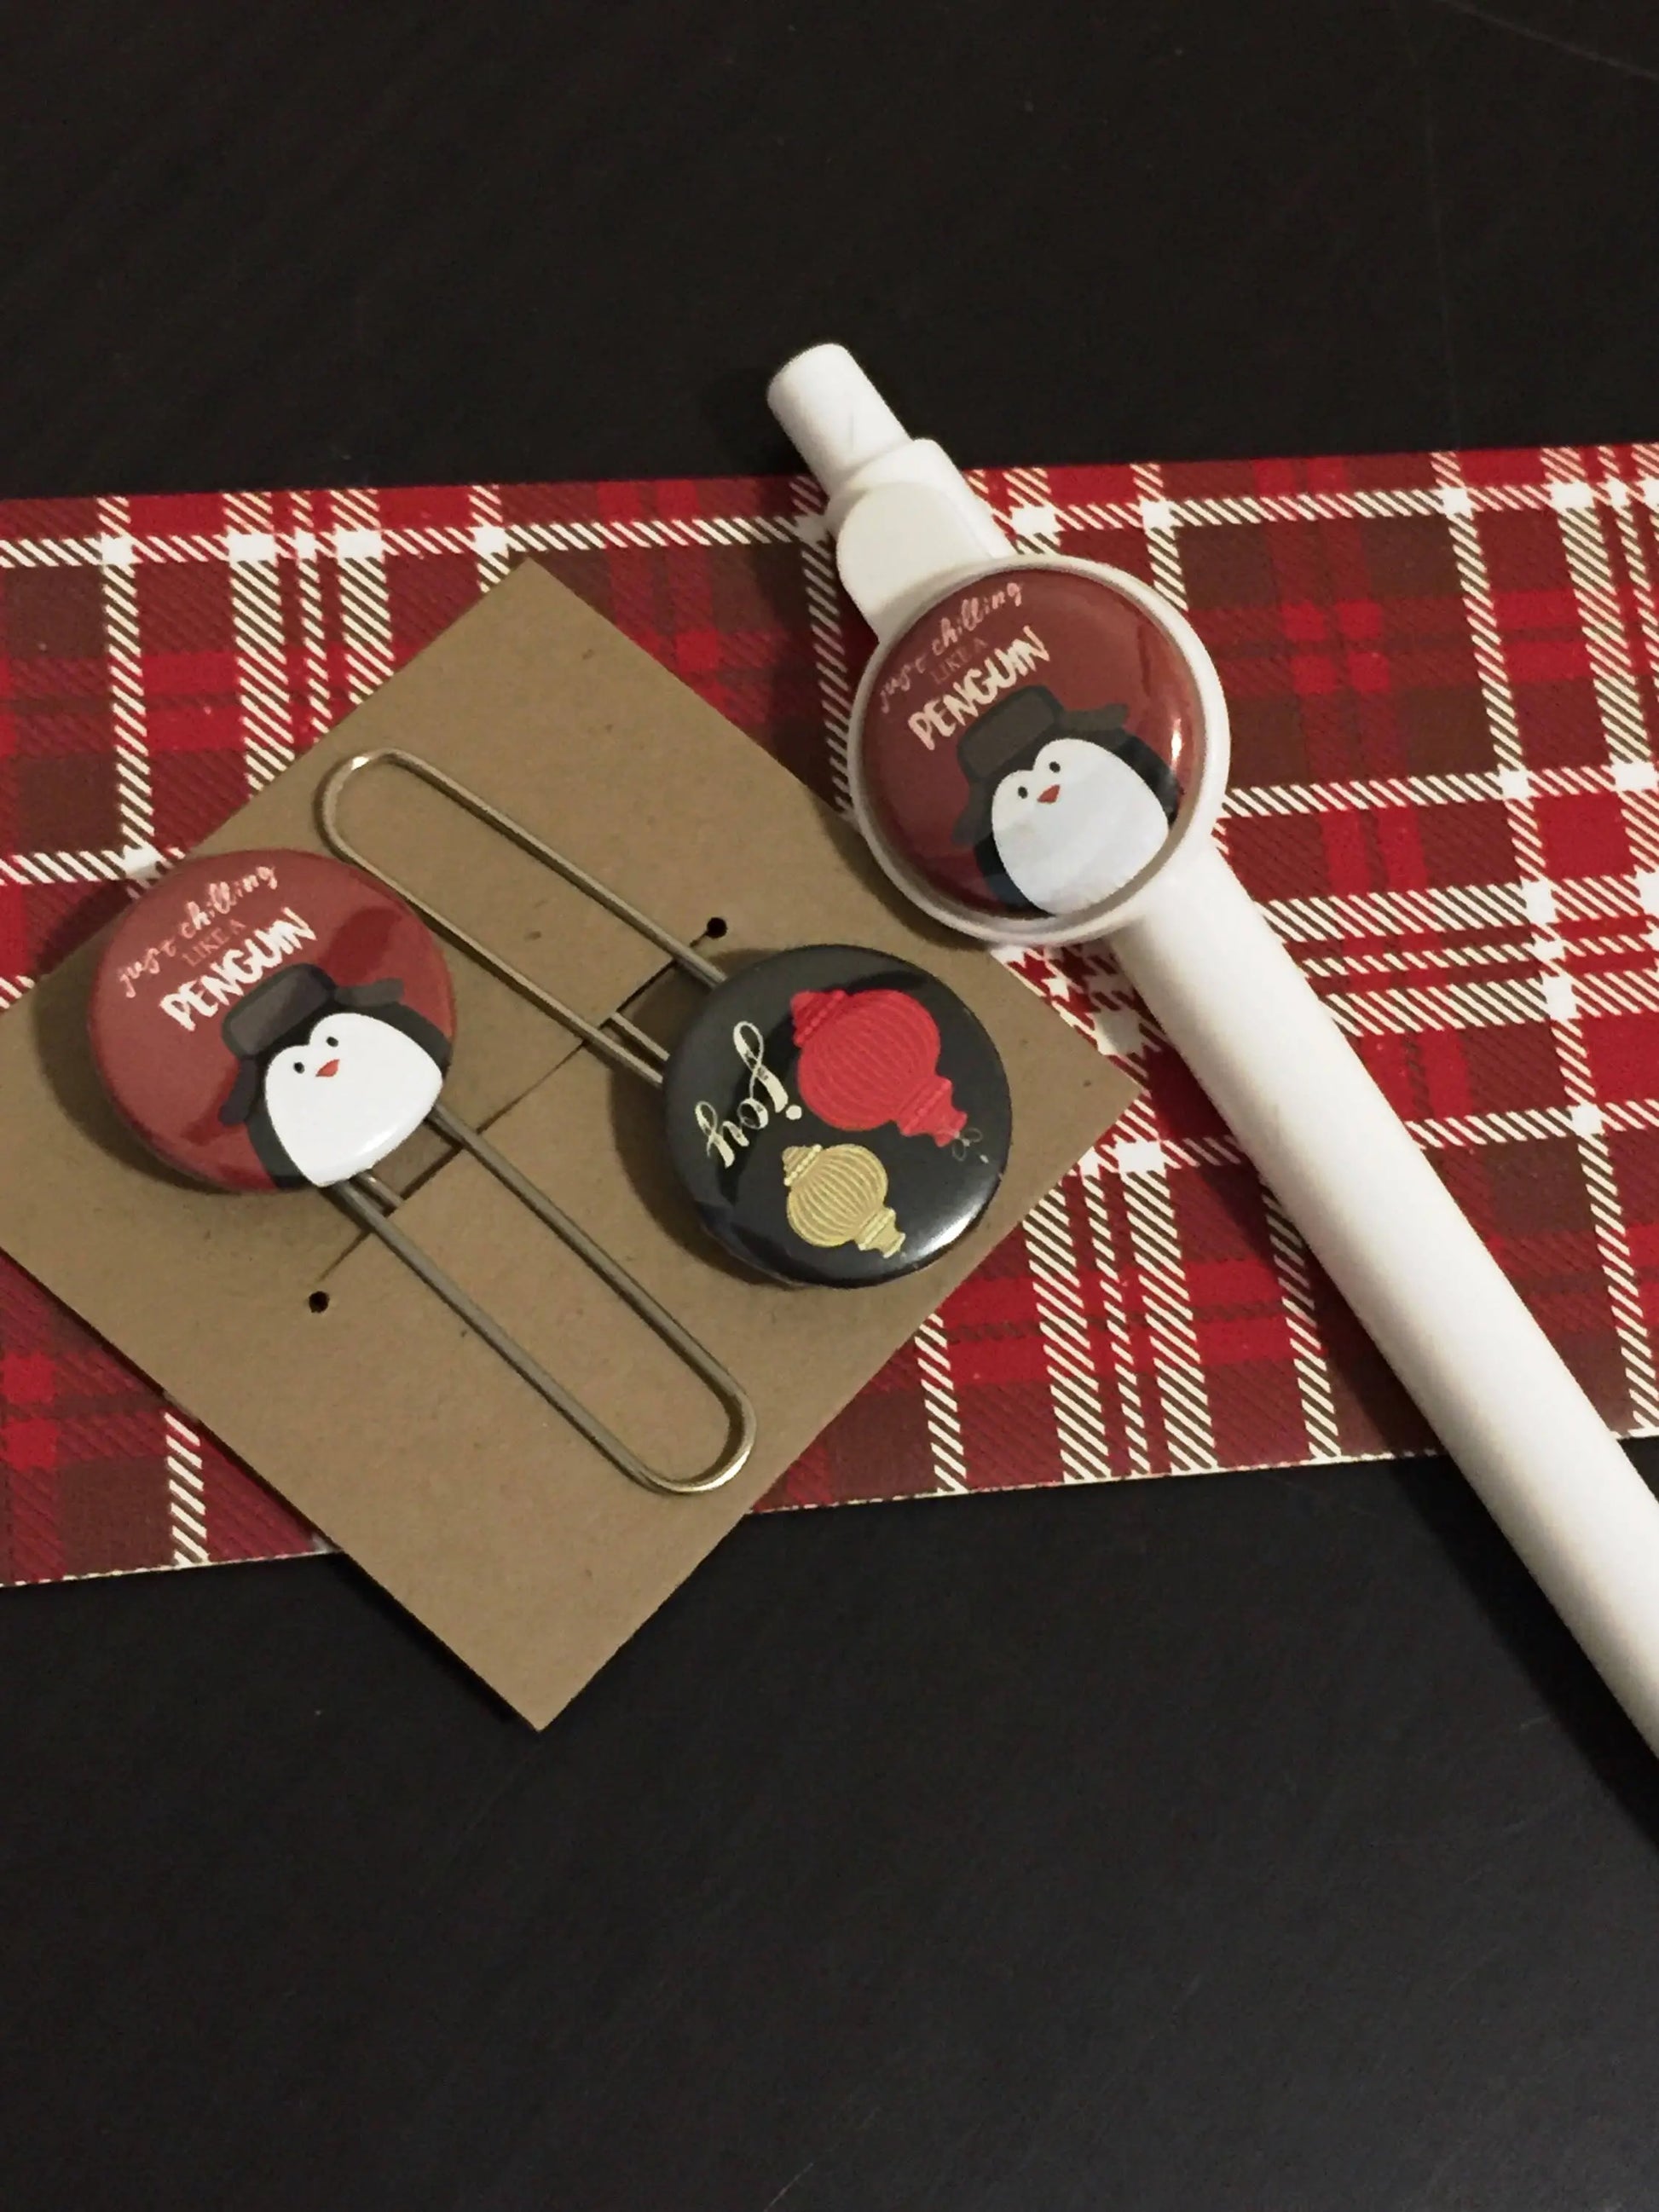 Polar Bear Gift Set - Holiday Custom Pen and Paperclip Set, Winter Gift Set - Personalize Christmas Pen and Bookmark - Stocking Stuffers busybeecreates